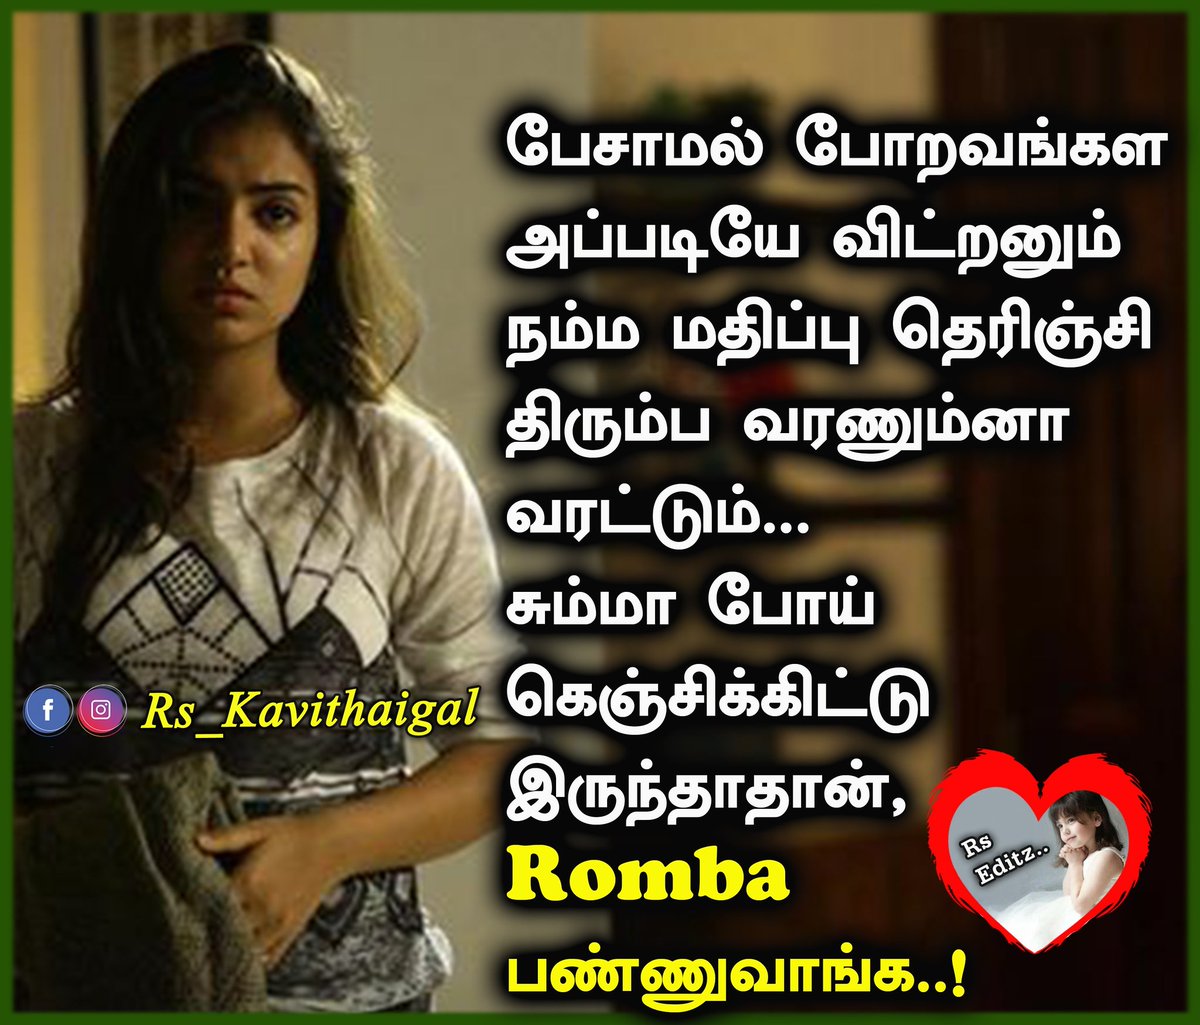 Rs_Kavithaigal on Twitter: 